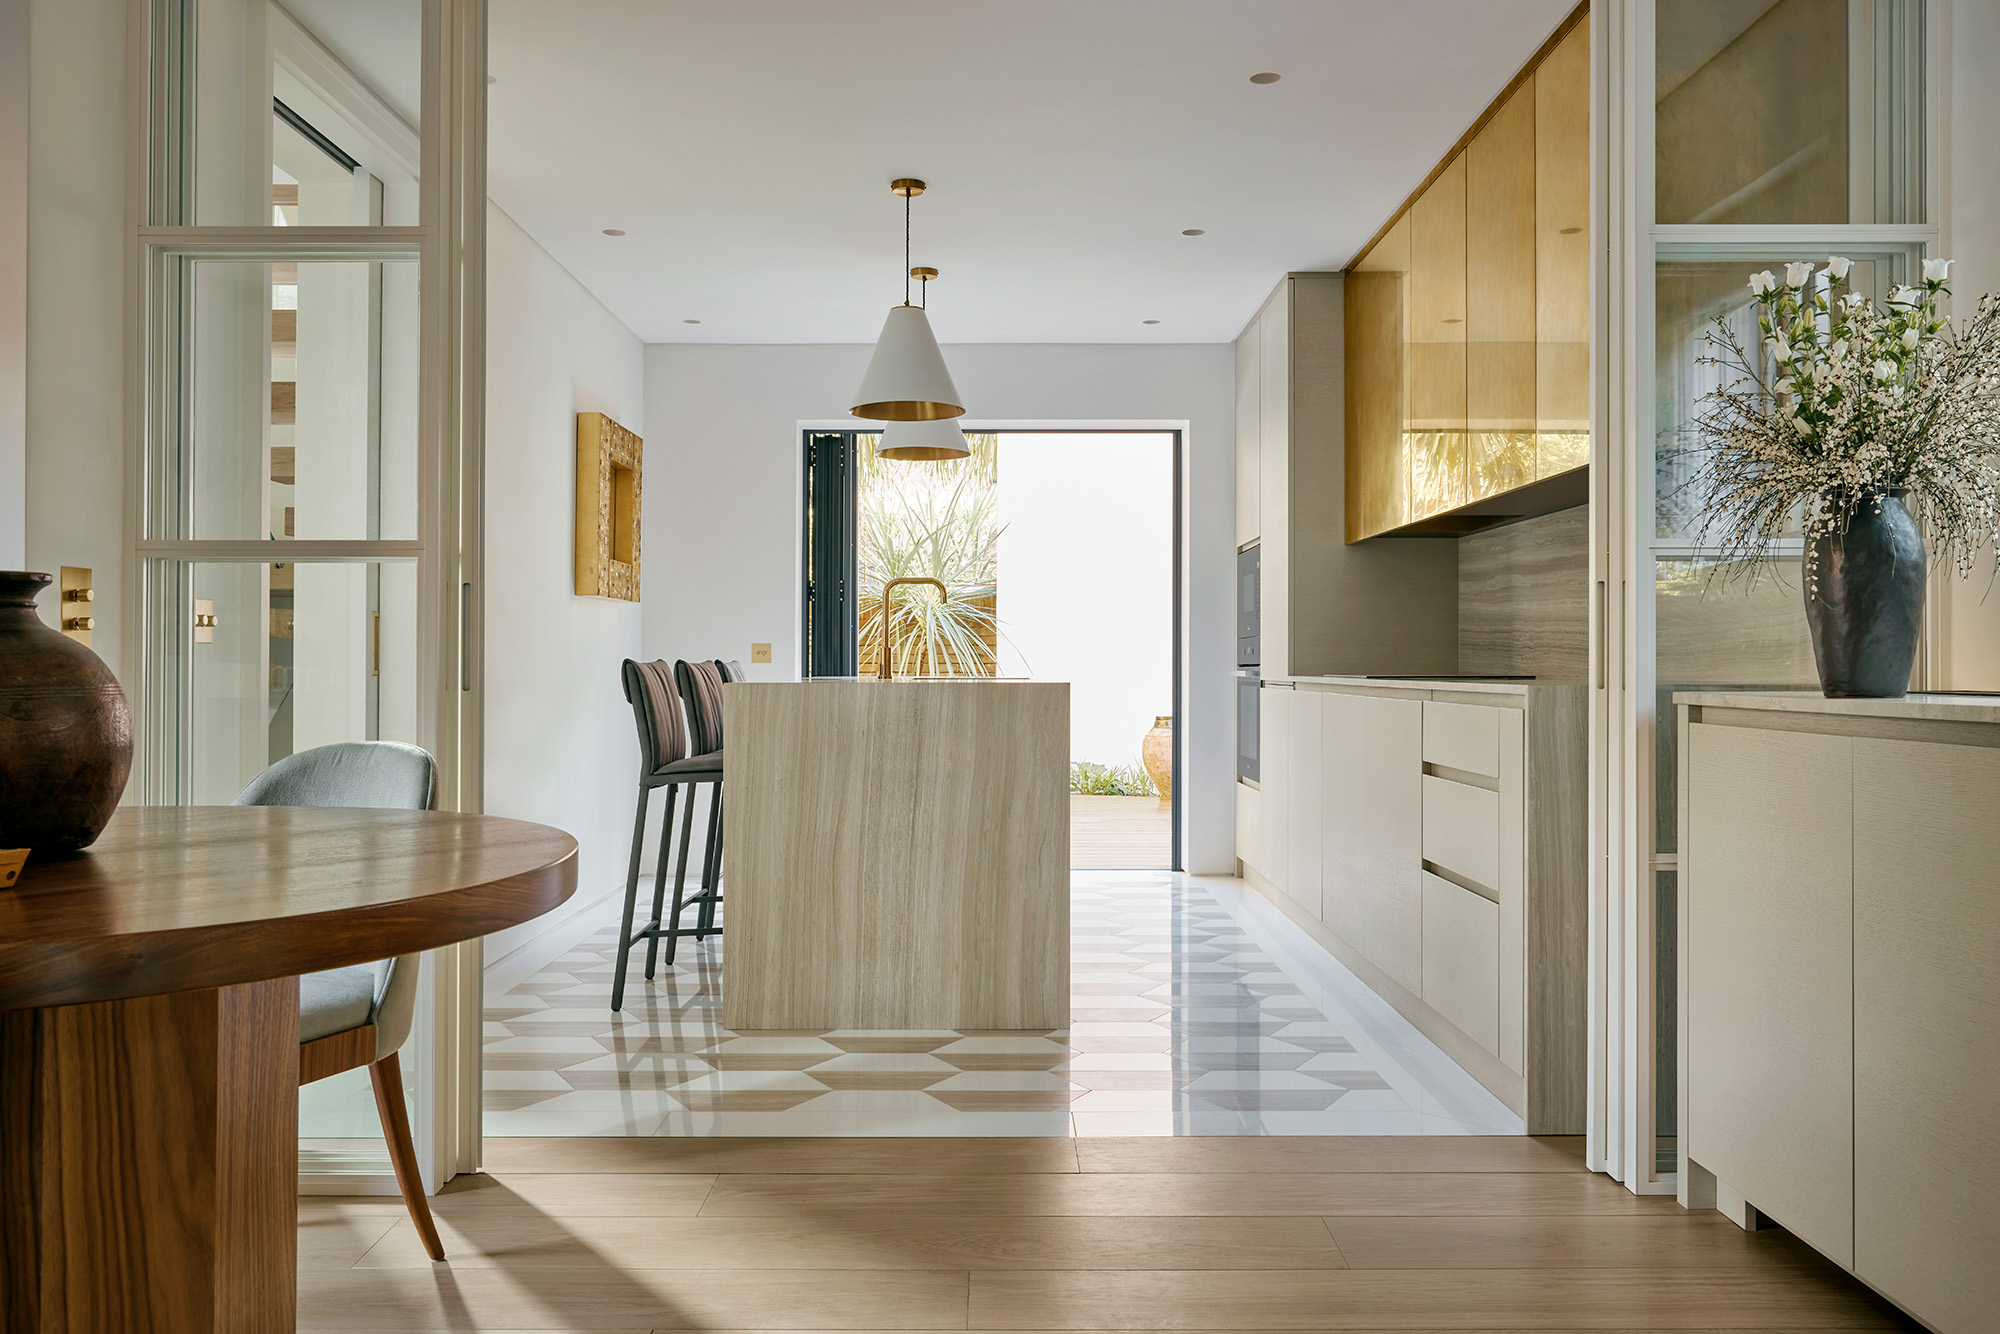 Windsor Way - Family Living Space. Bespoke open plan kitchen layout with kitchen island and marble and brass finishes.